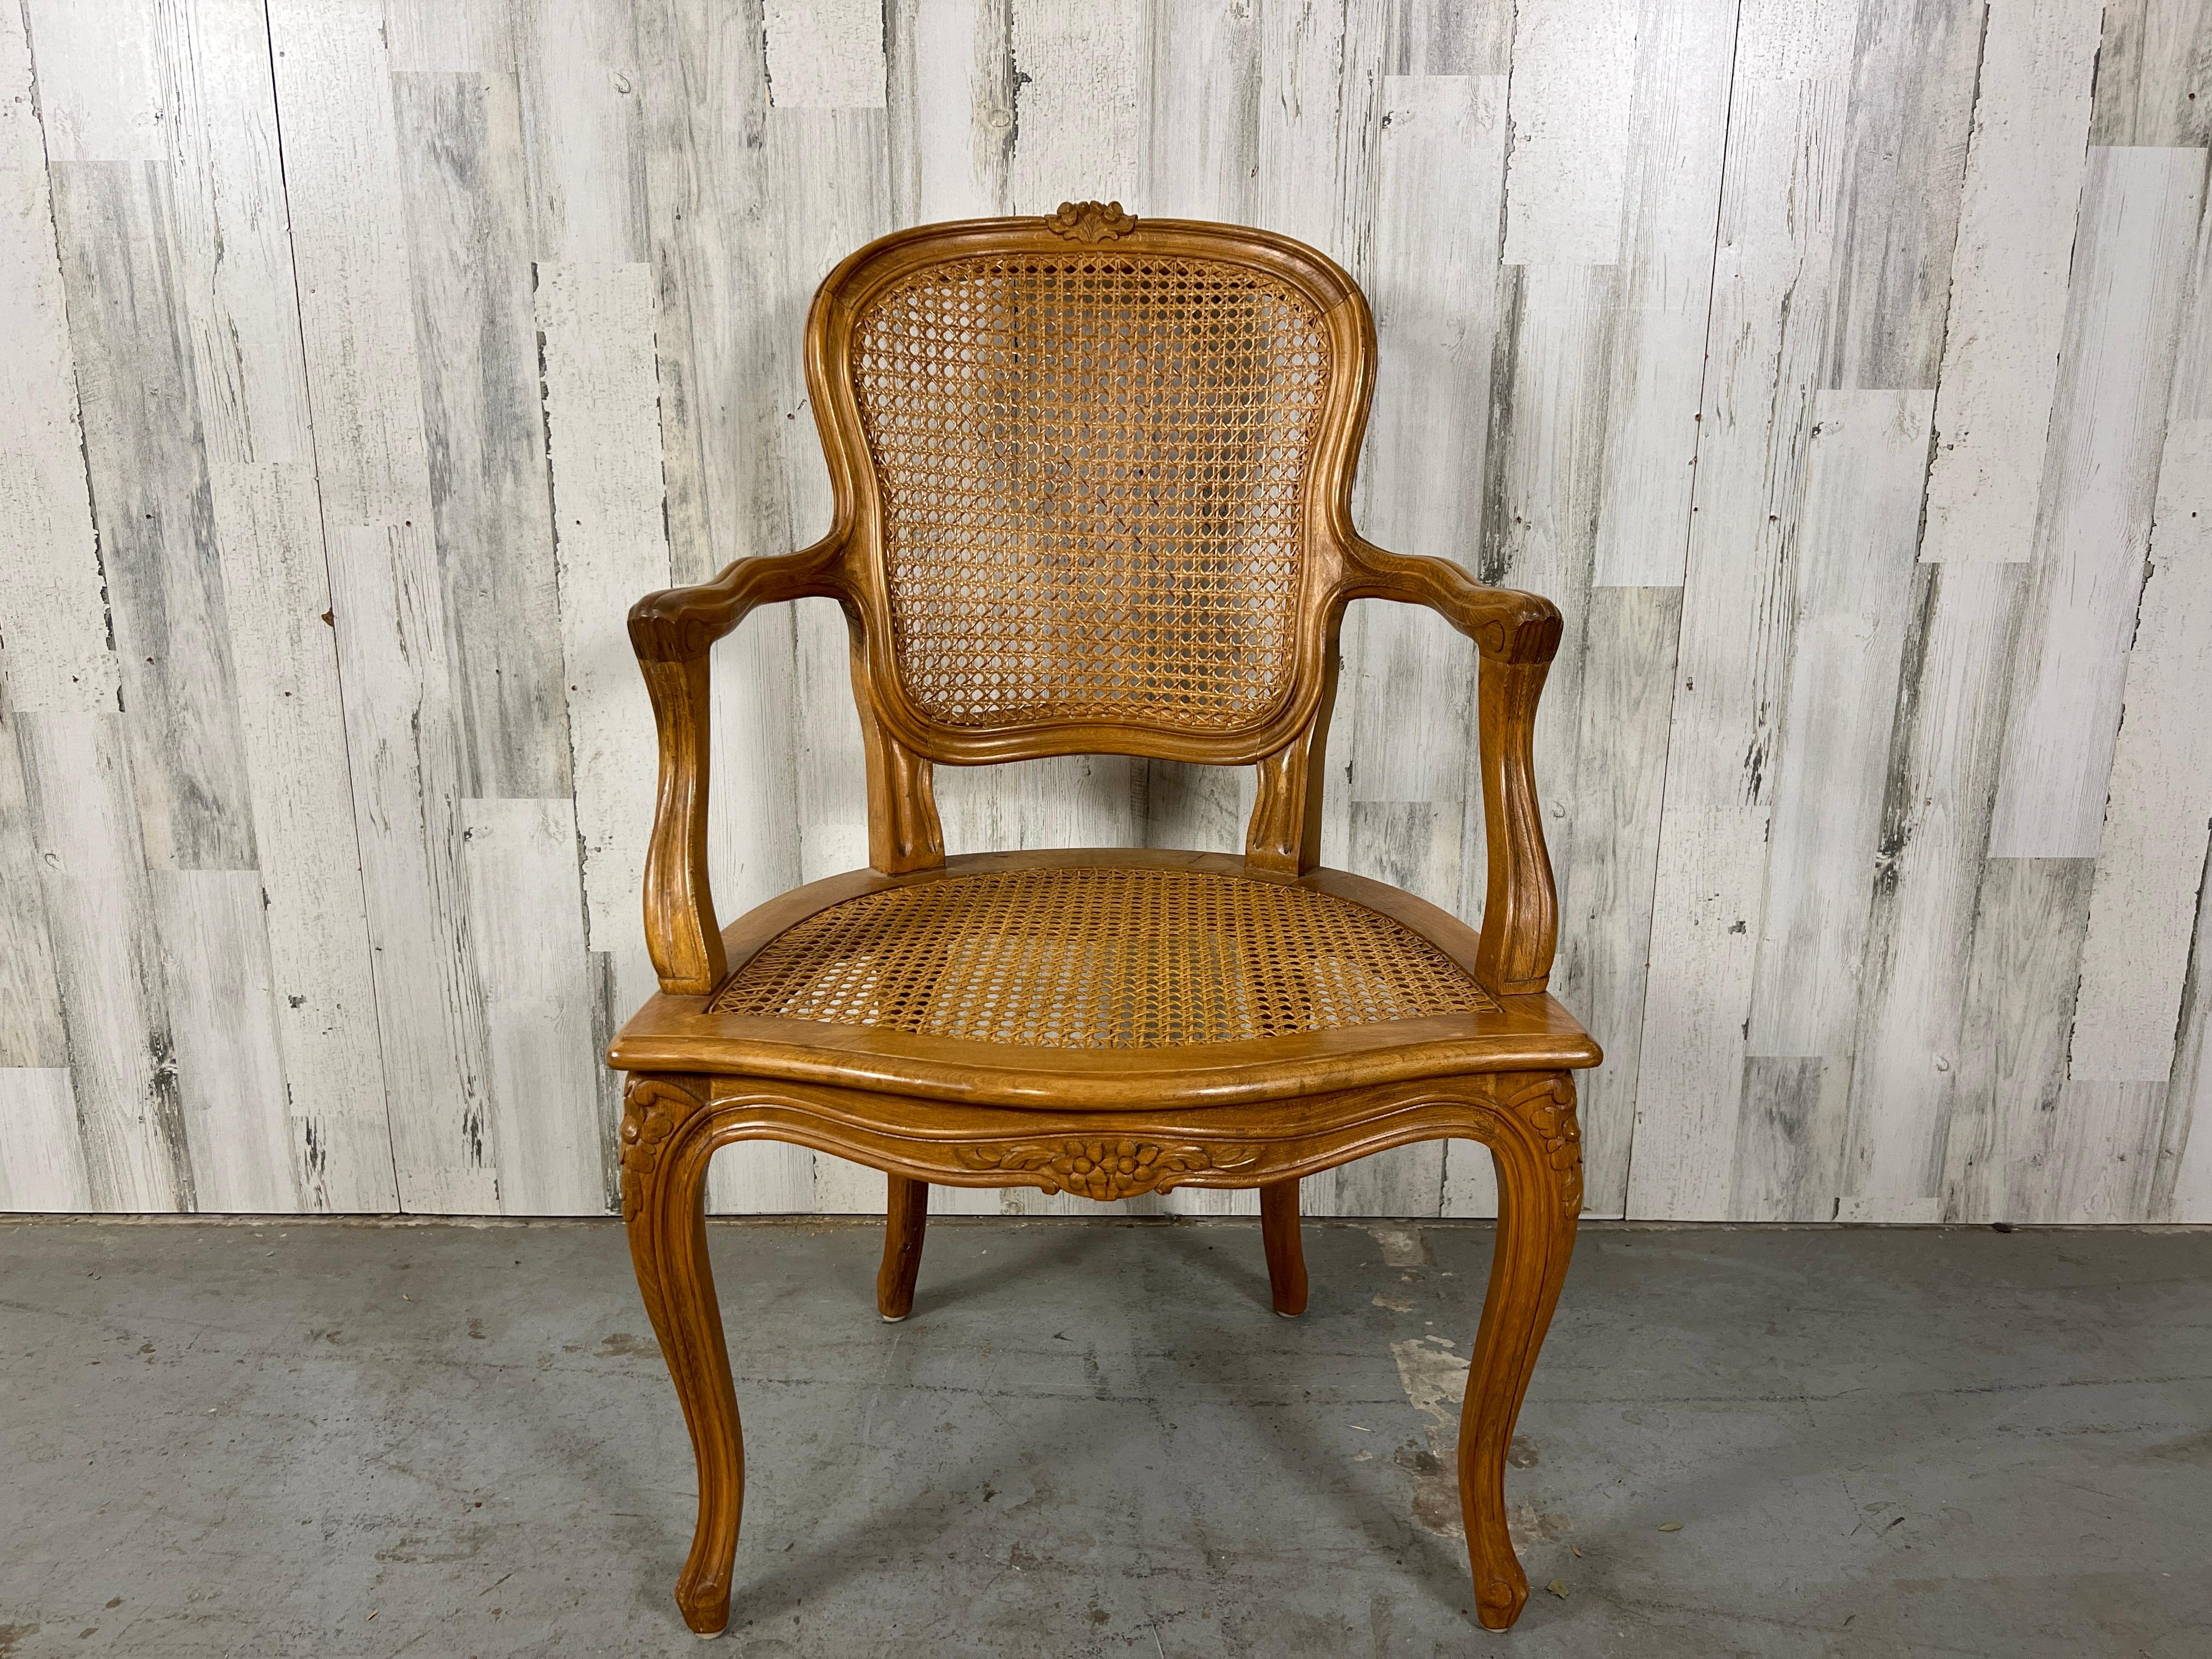 Very elegant sculptural cane armchair with carved floral accents. The curved back makes this very more comfortable than a straight back chair. Can be used as a desk chair, dining chair or hall chair.